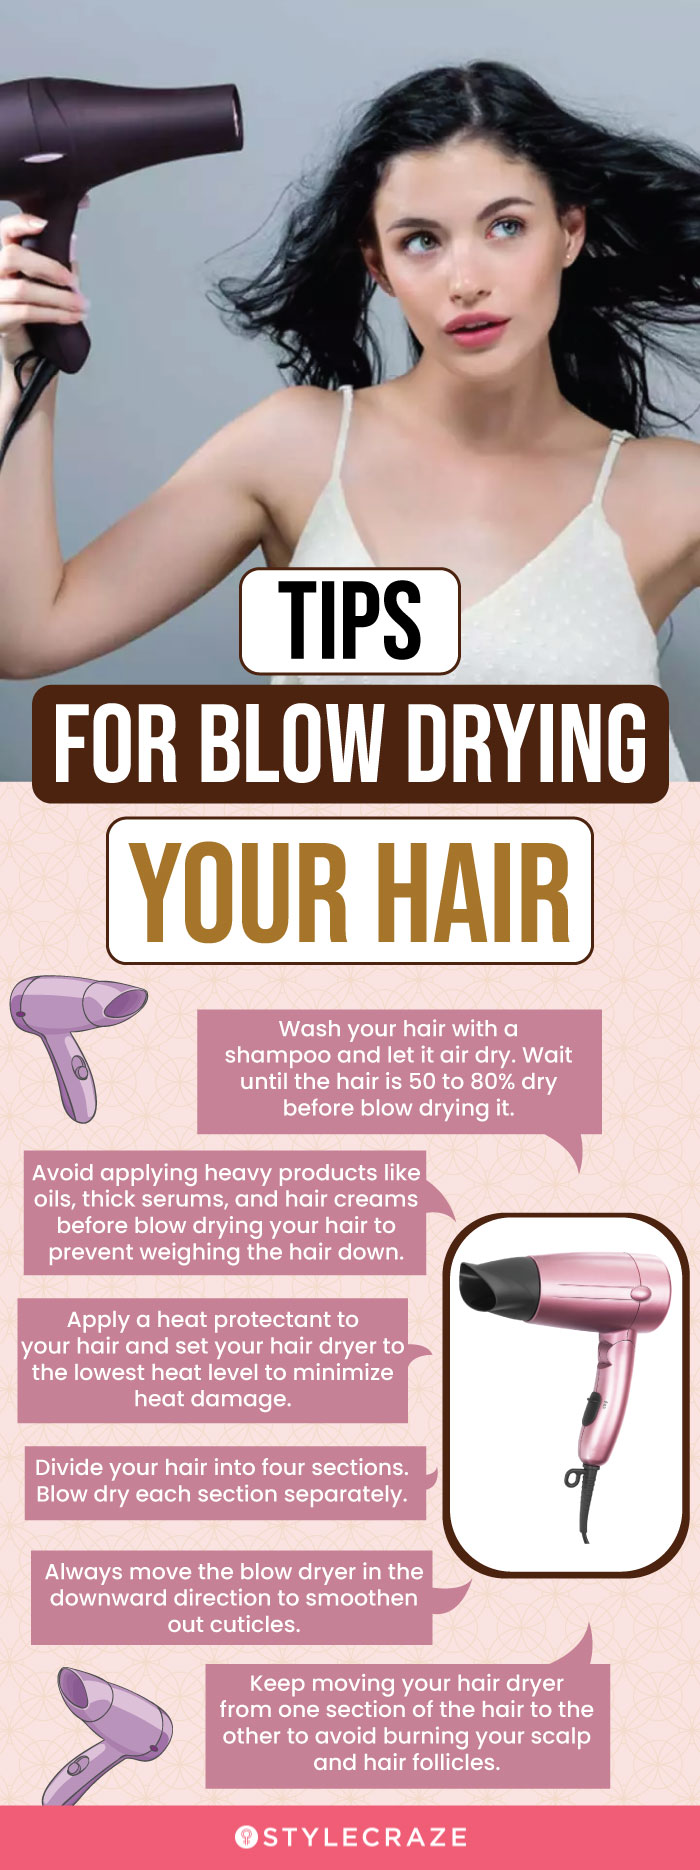 Tips For Blow Drying Your Hair (infographic)